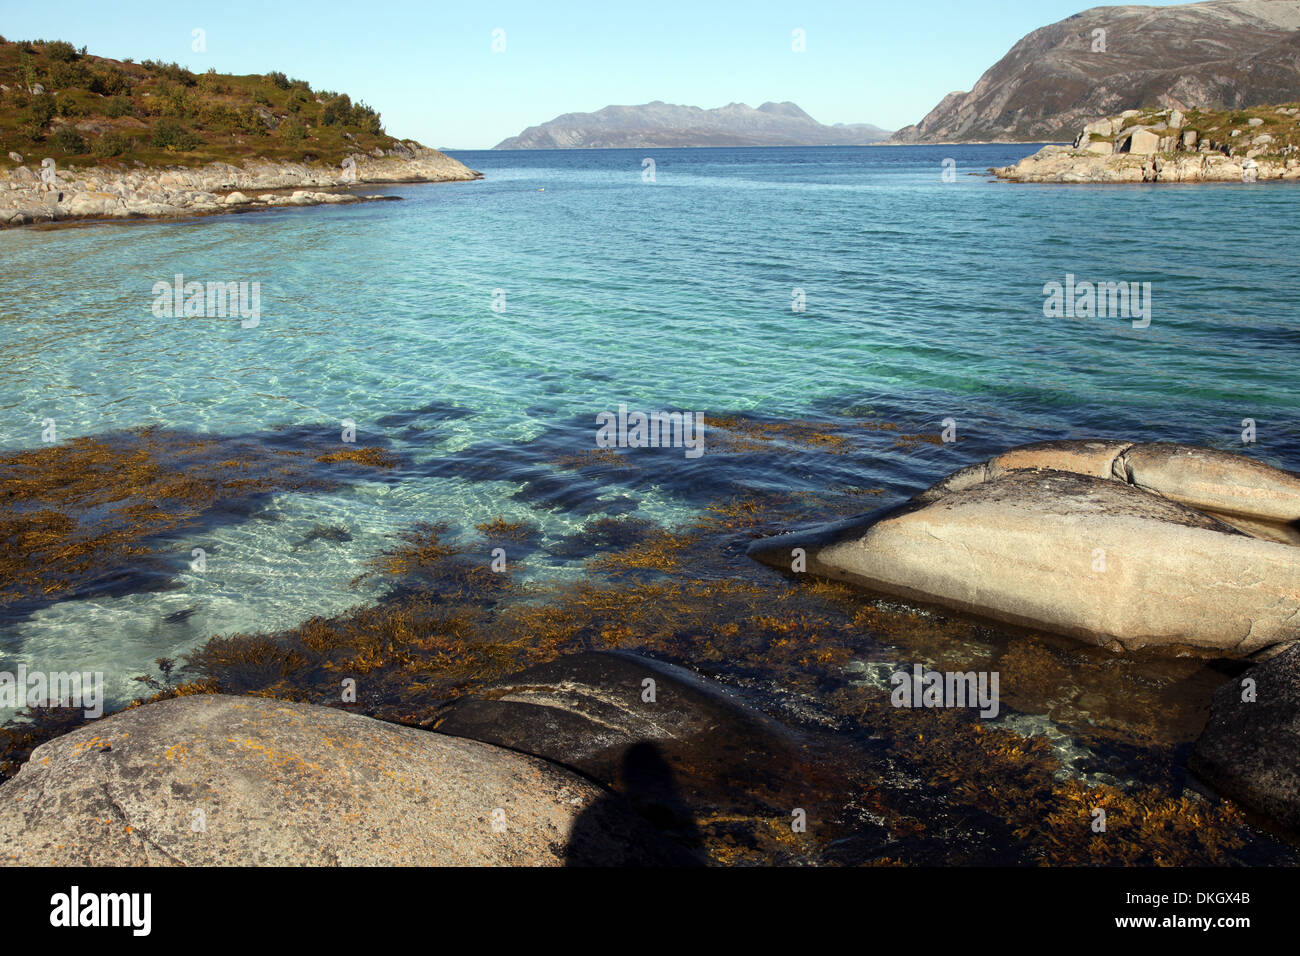 Rock and weed in harbour at Gasvaer, Kvalfjord, Troms, North Norway, Norway, Scandinavia, Europe Stock Photo